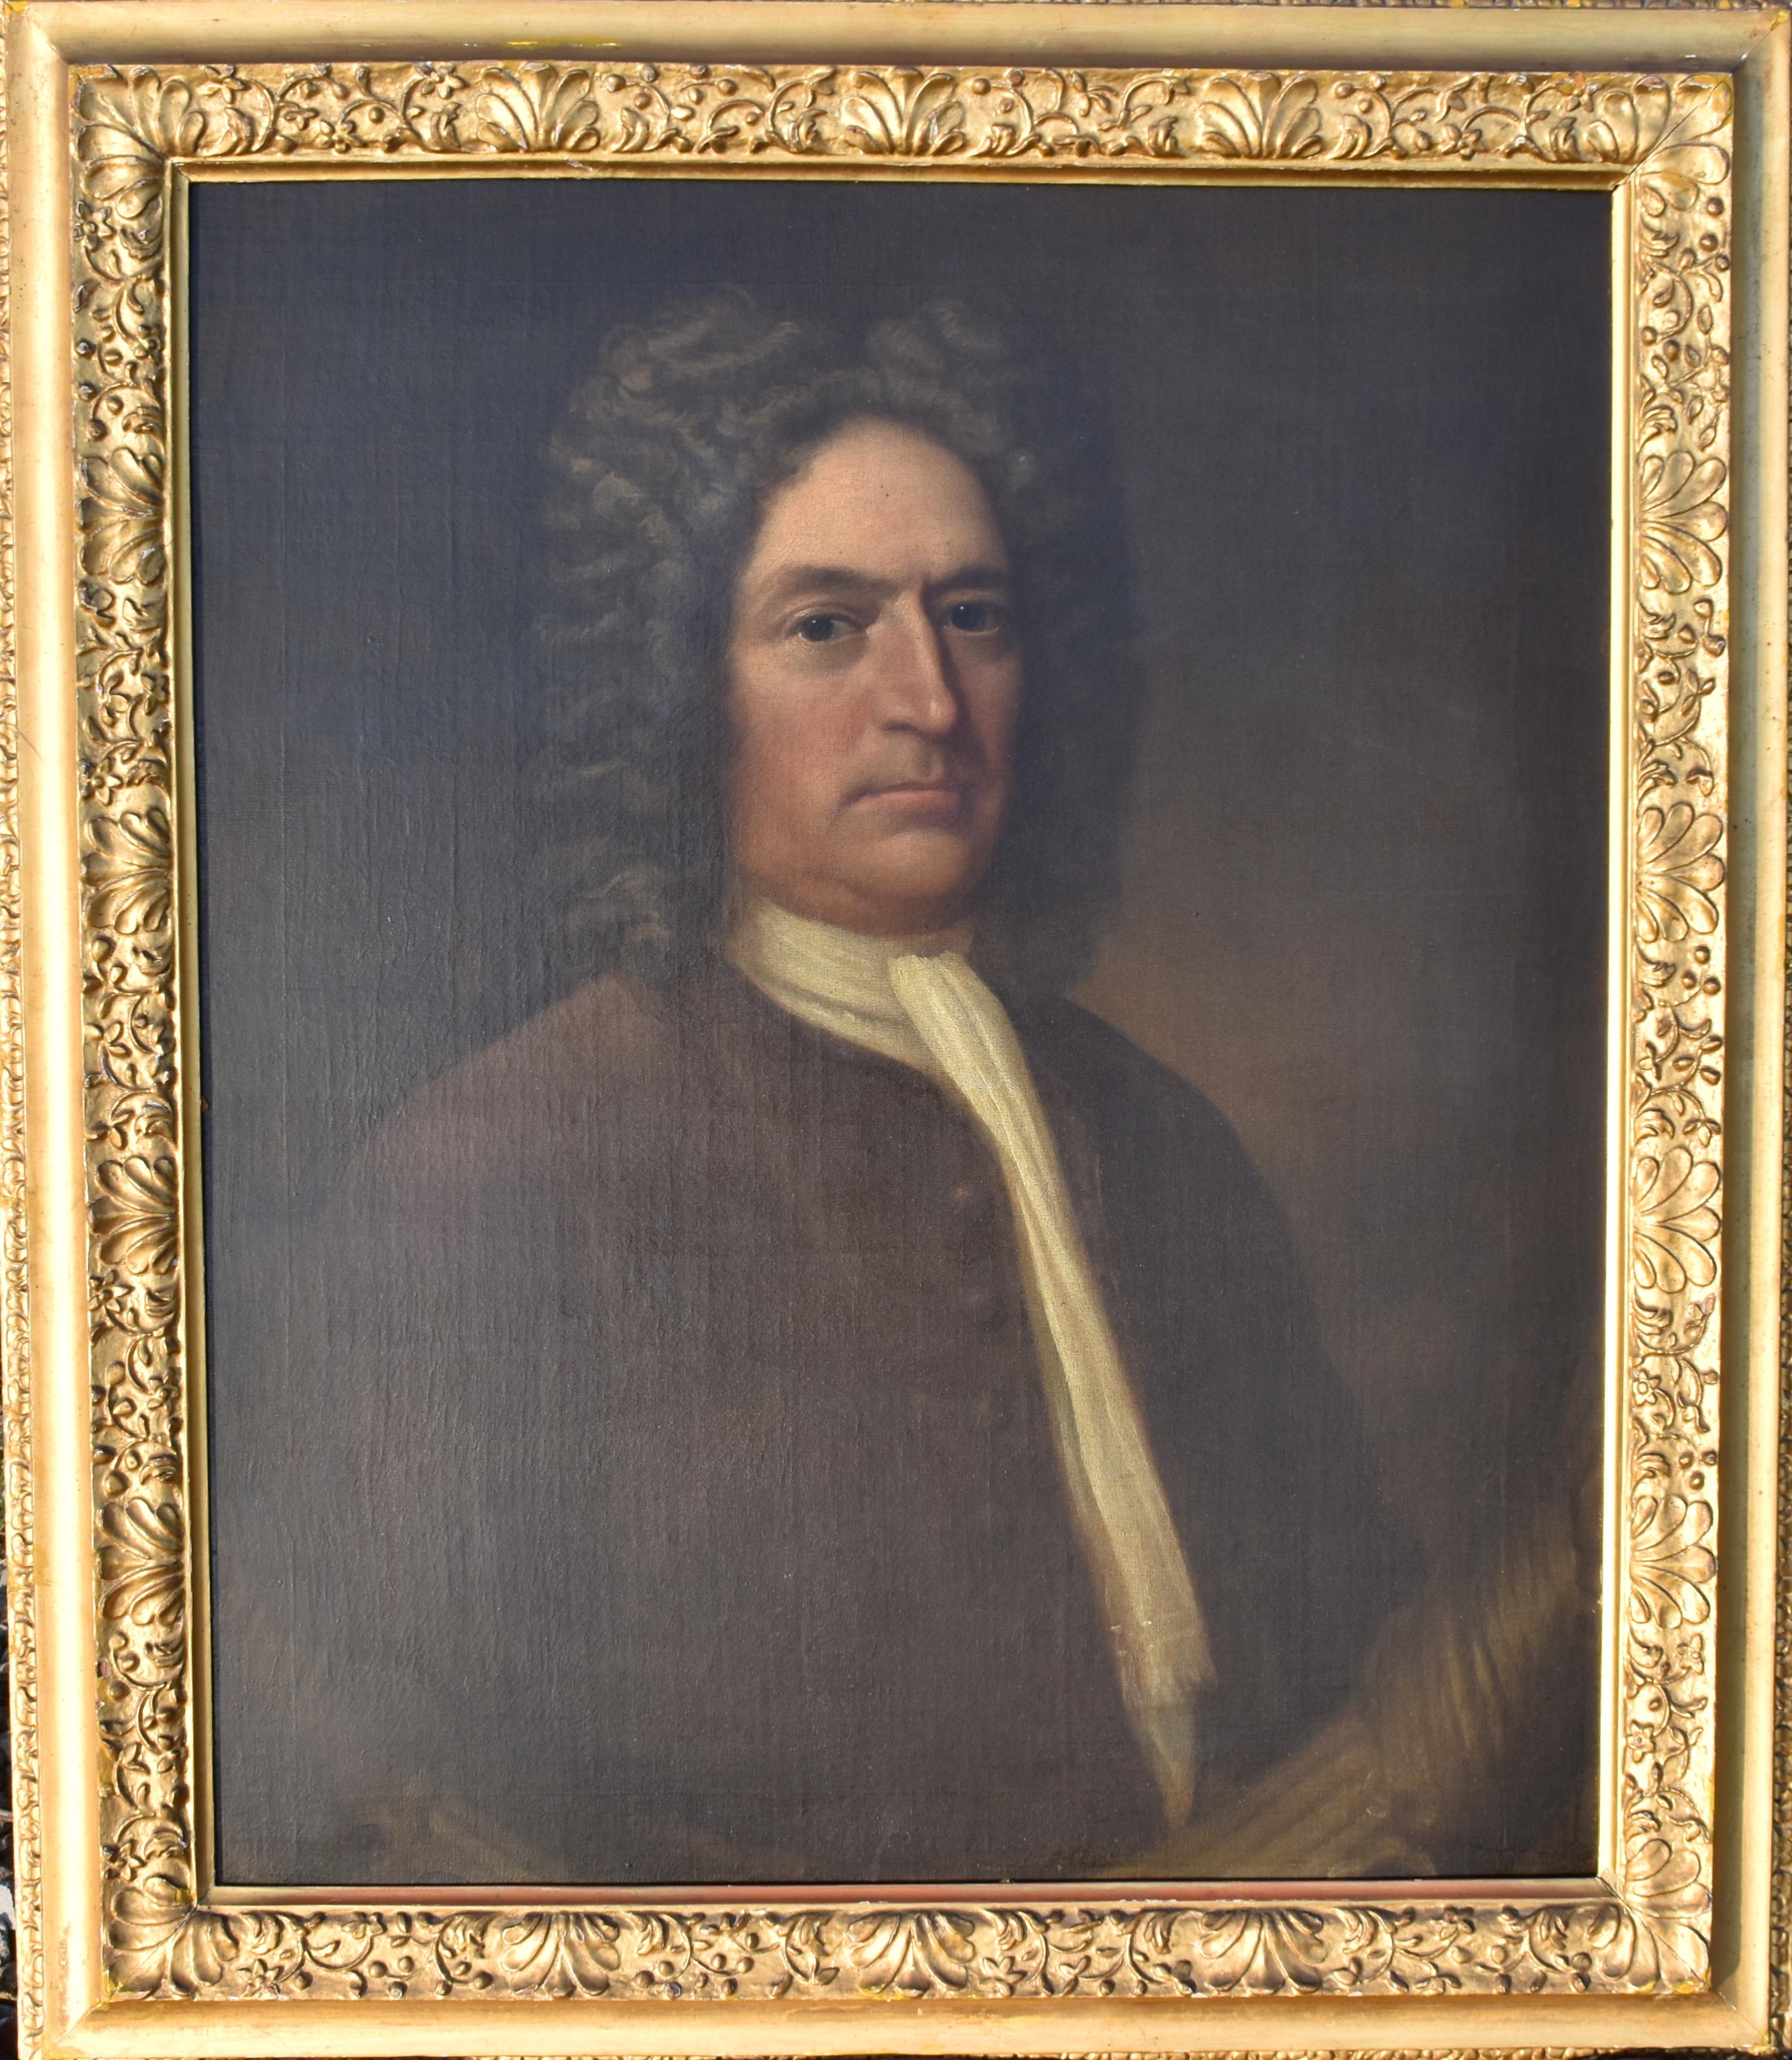 A magnificent portrait of Henry Izod aged 67 in 1726, unsigned, but attributed verso to De Coning.  Presented in a delightful frame probably the original.  The name Izod seems to have it roots in the Cotswold area of England.

De Coning was a Dutch